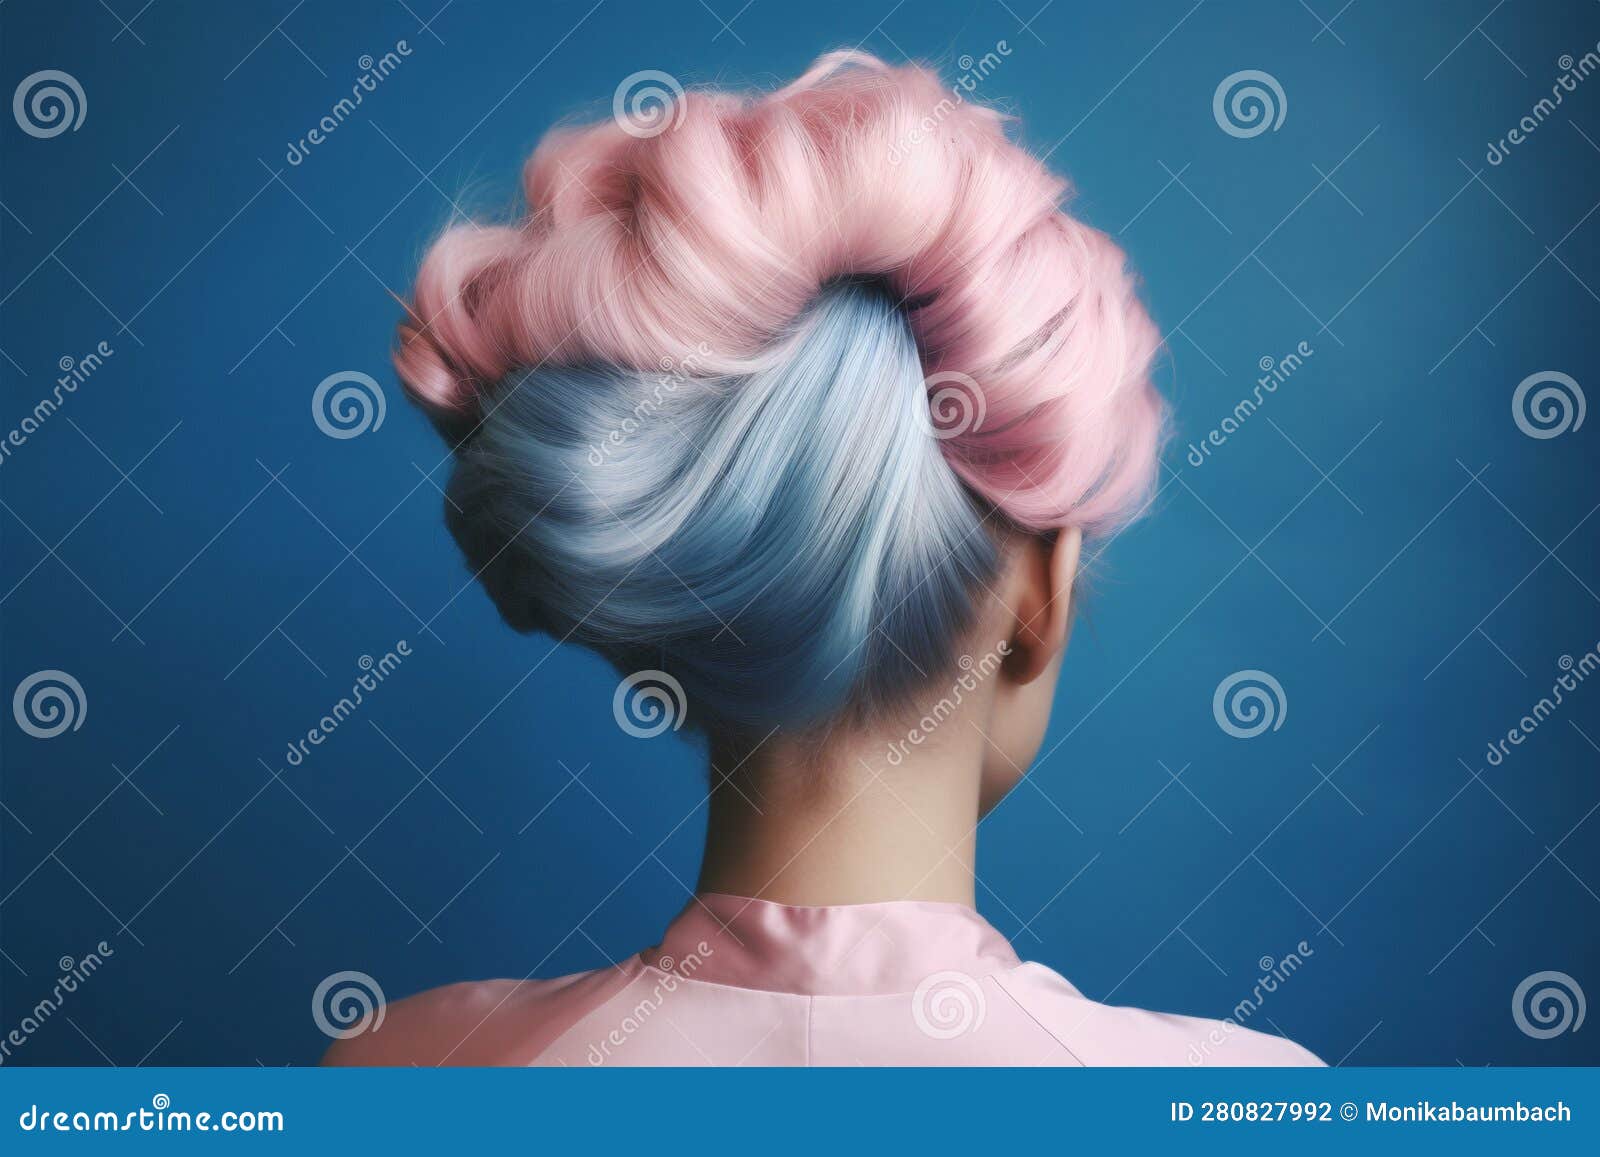 10. "Pink and Blue Hair Accessories: Fun and Stylish Ways to Add a Pop of Color to Your Look" - wide 11